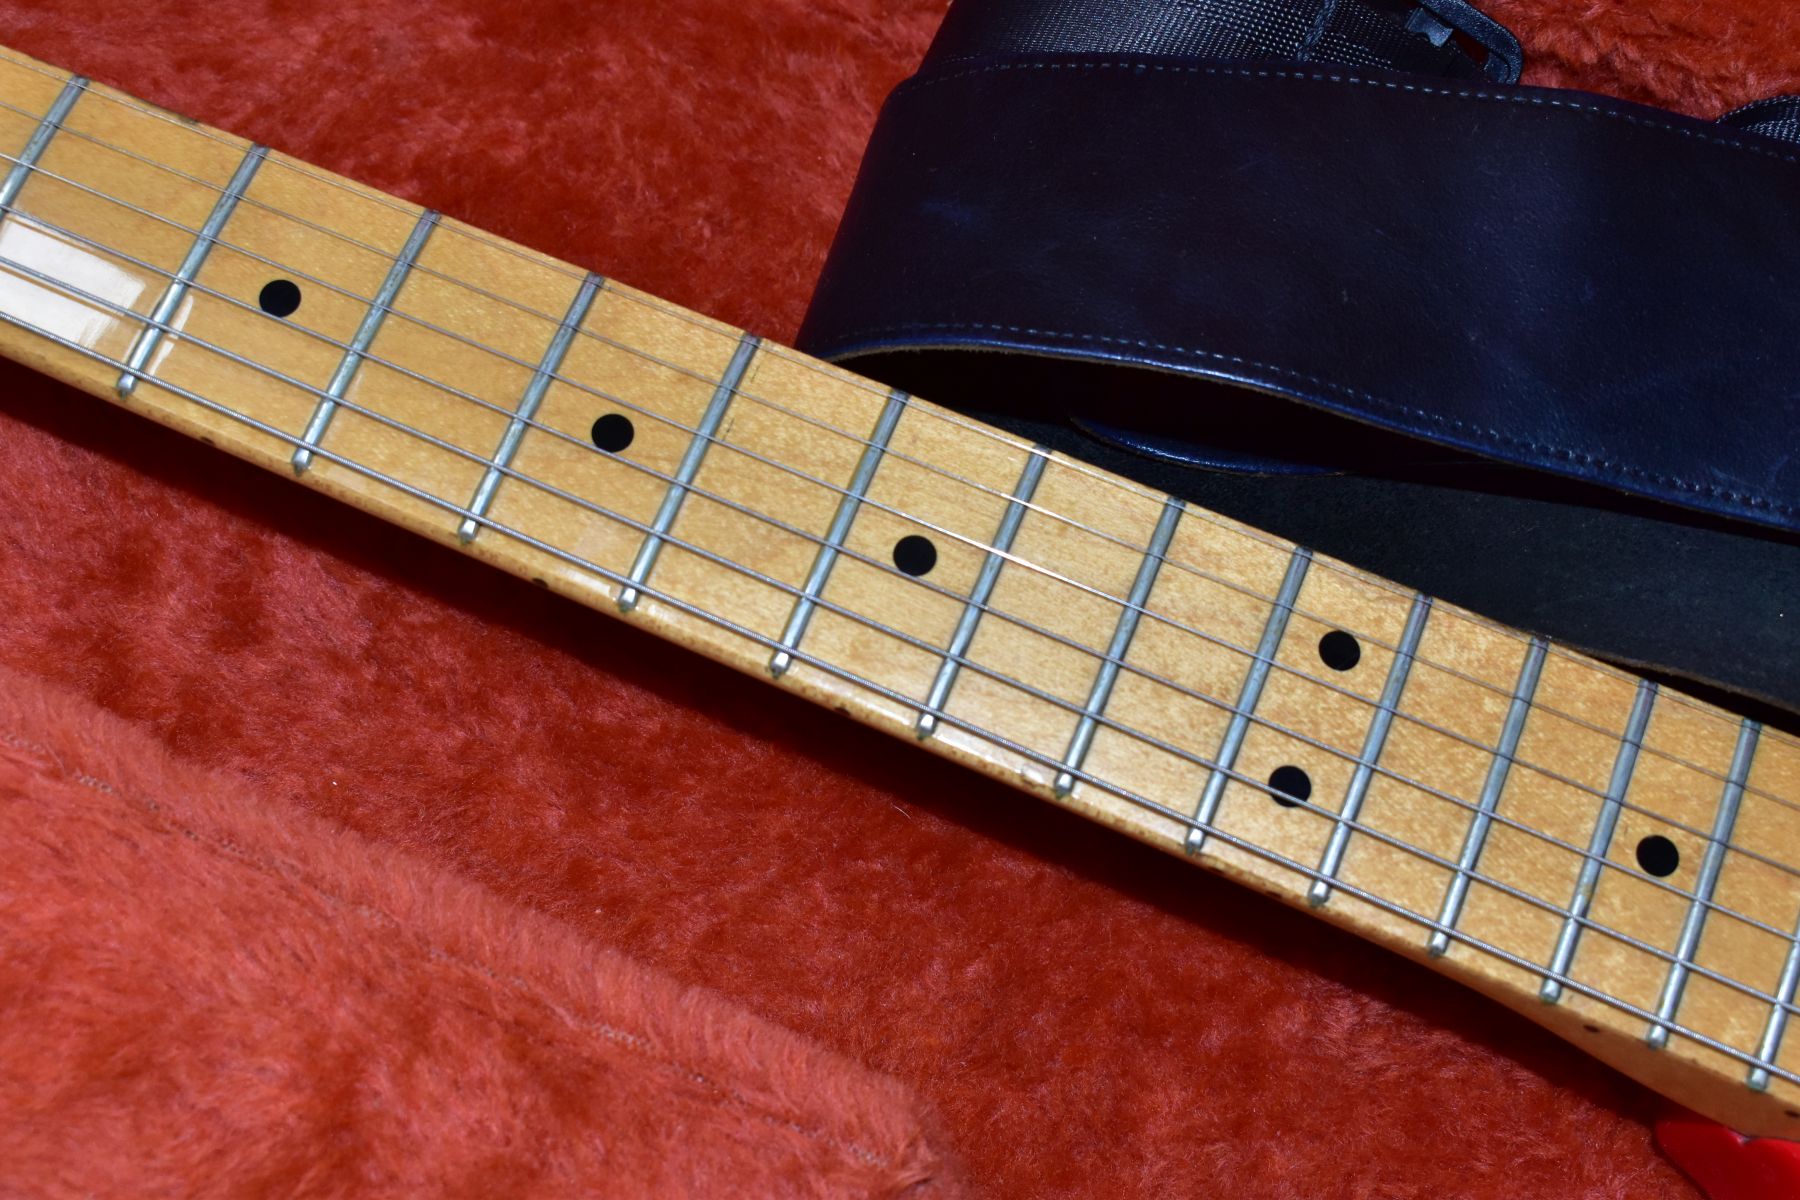 A 1984 USA FENDER STRATOCASTER GUITAR, in red with a one piece maple neck and fingerboard, gold - Image 3 of 6